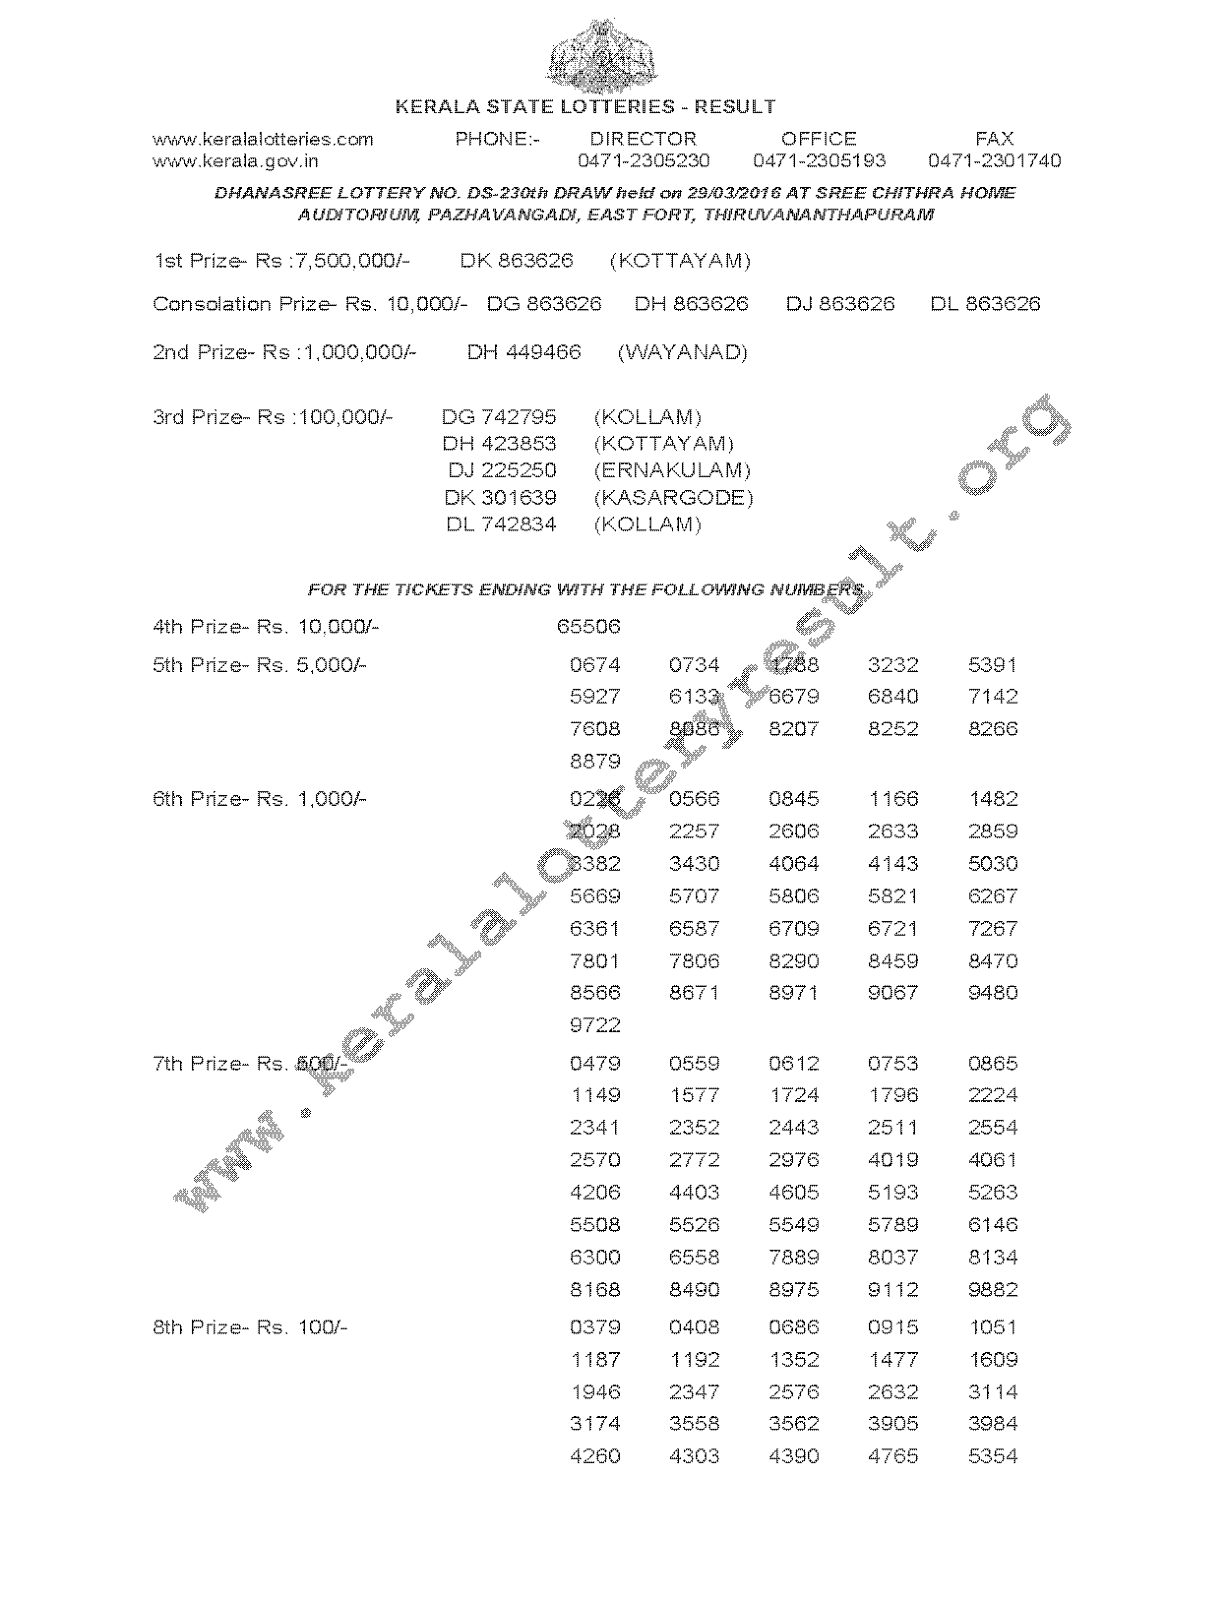 DHANASREE Lottery DS 230 Result 29-3-2016